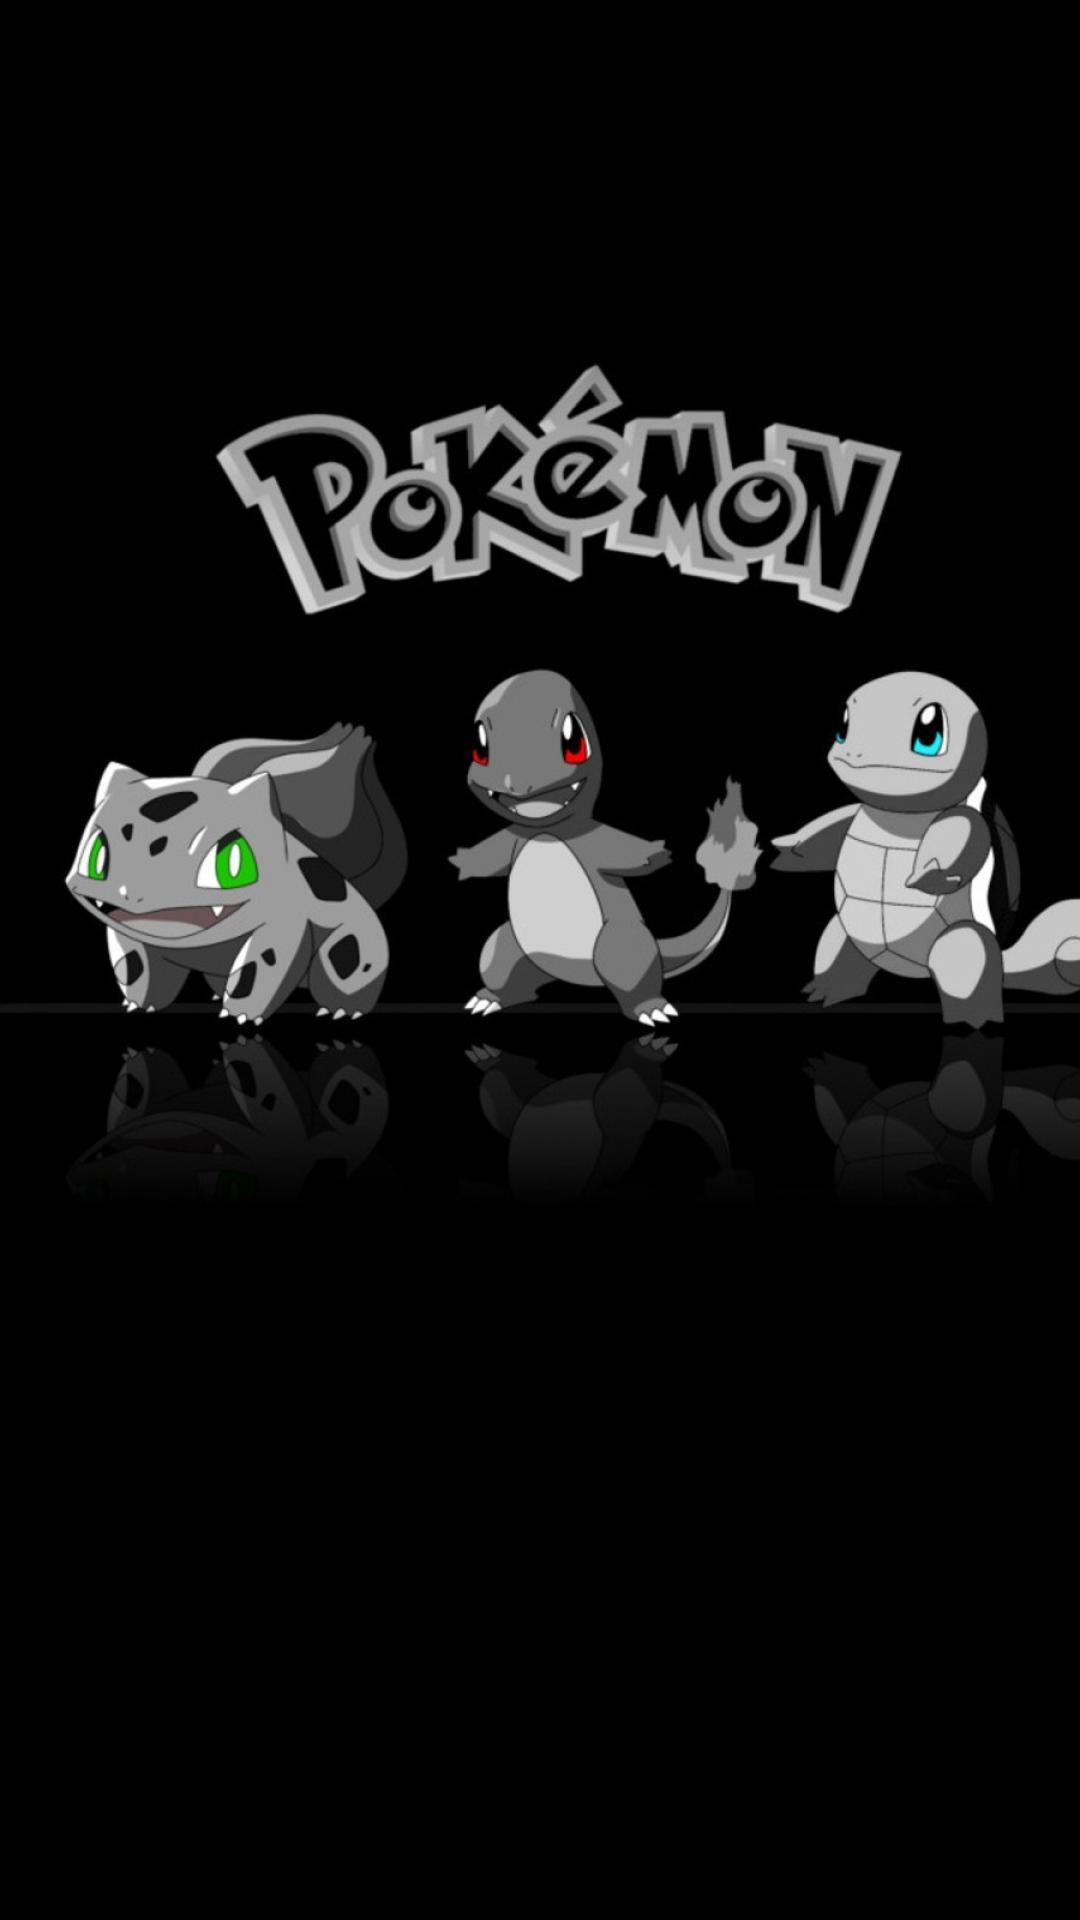 Free Download Download Pokemon Go Wallpapers For Iphone 1080x19 For Your Desktop Mobile Tablet Explore 98 Pokemon Gold And Silver Wallpapers Pokemon Gold And Silver Wallpapers Silver And Gold